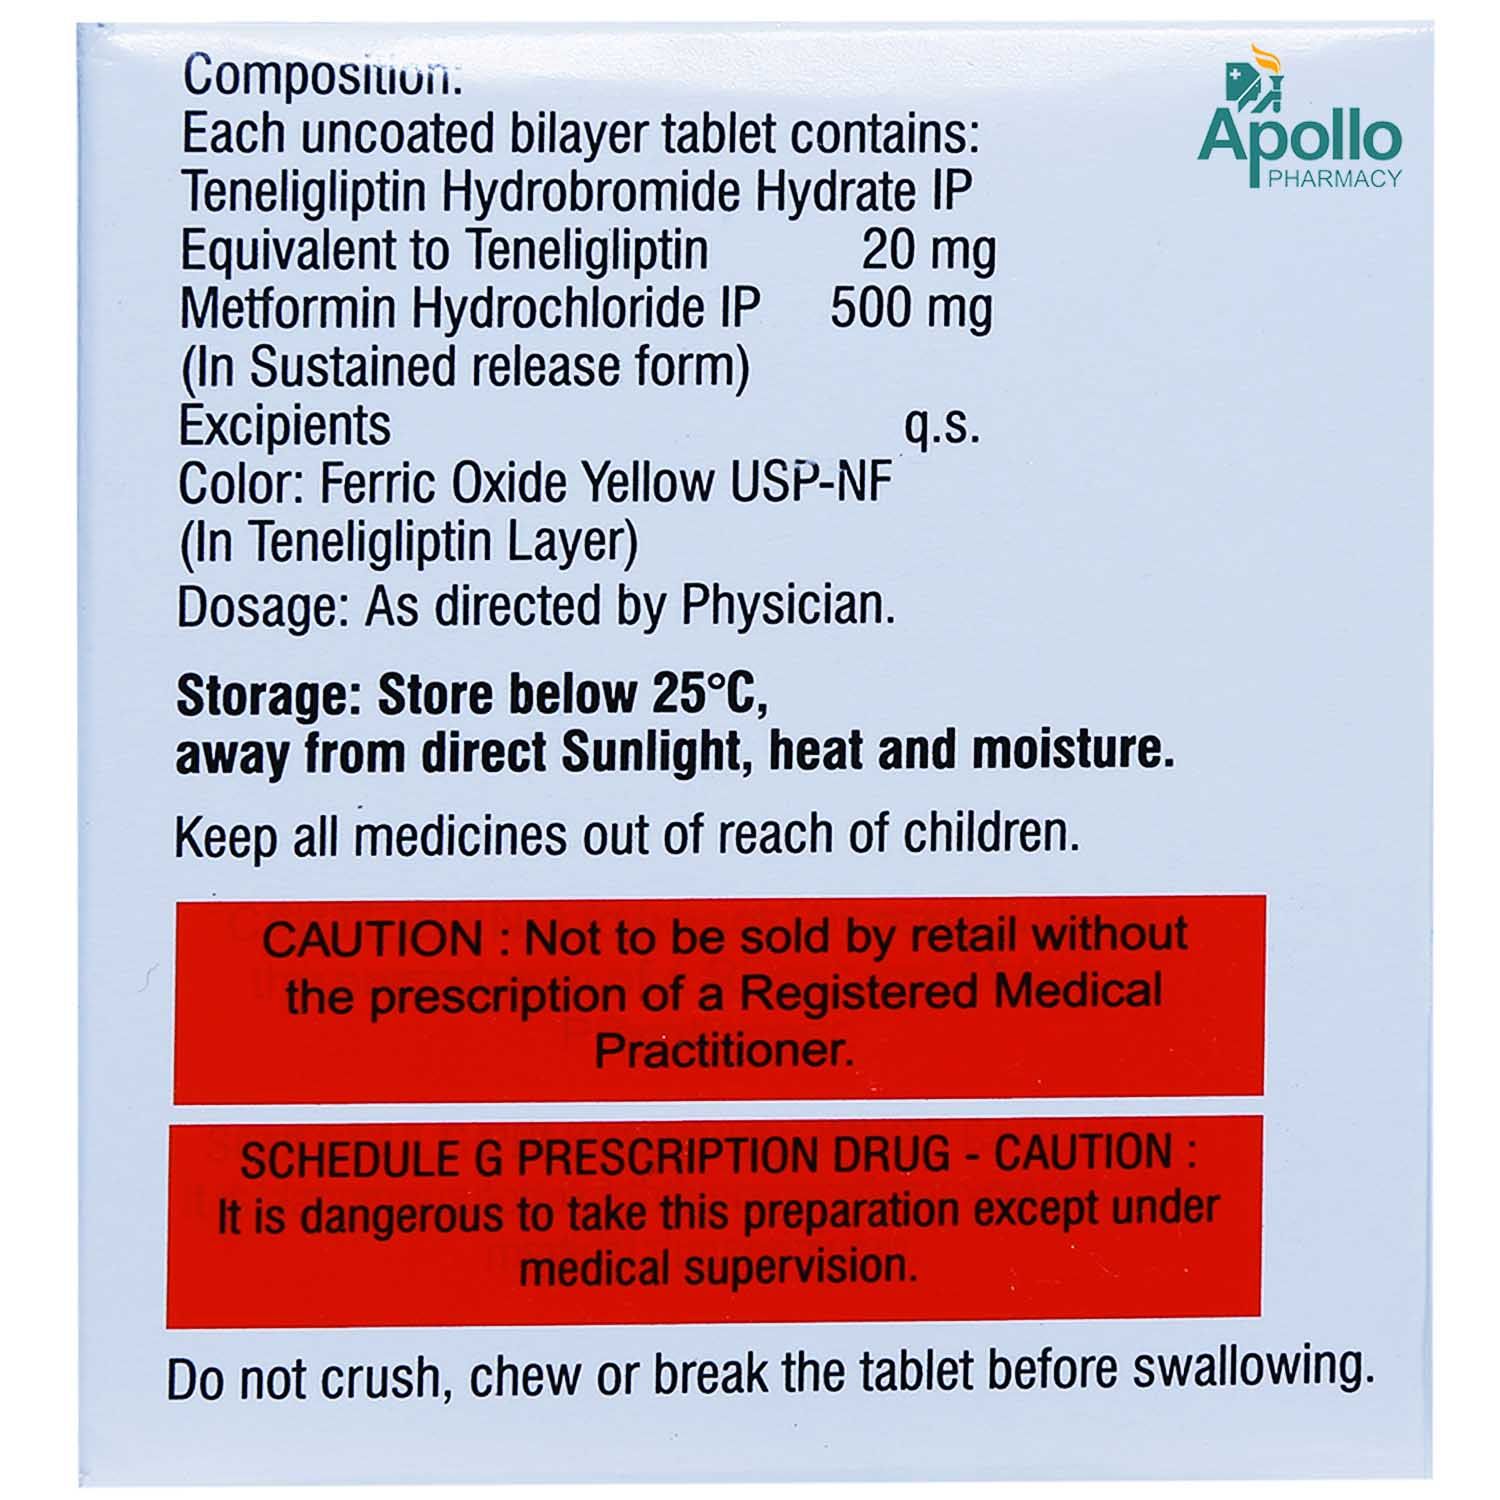 Tenlimac M 500 Tablet 10 S Price Uses Side Effects Composition Apollo Pharmacy